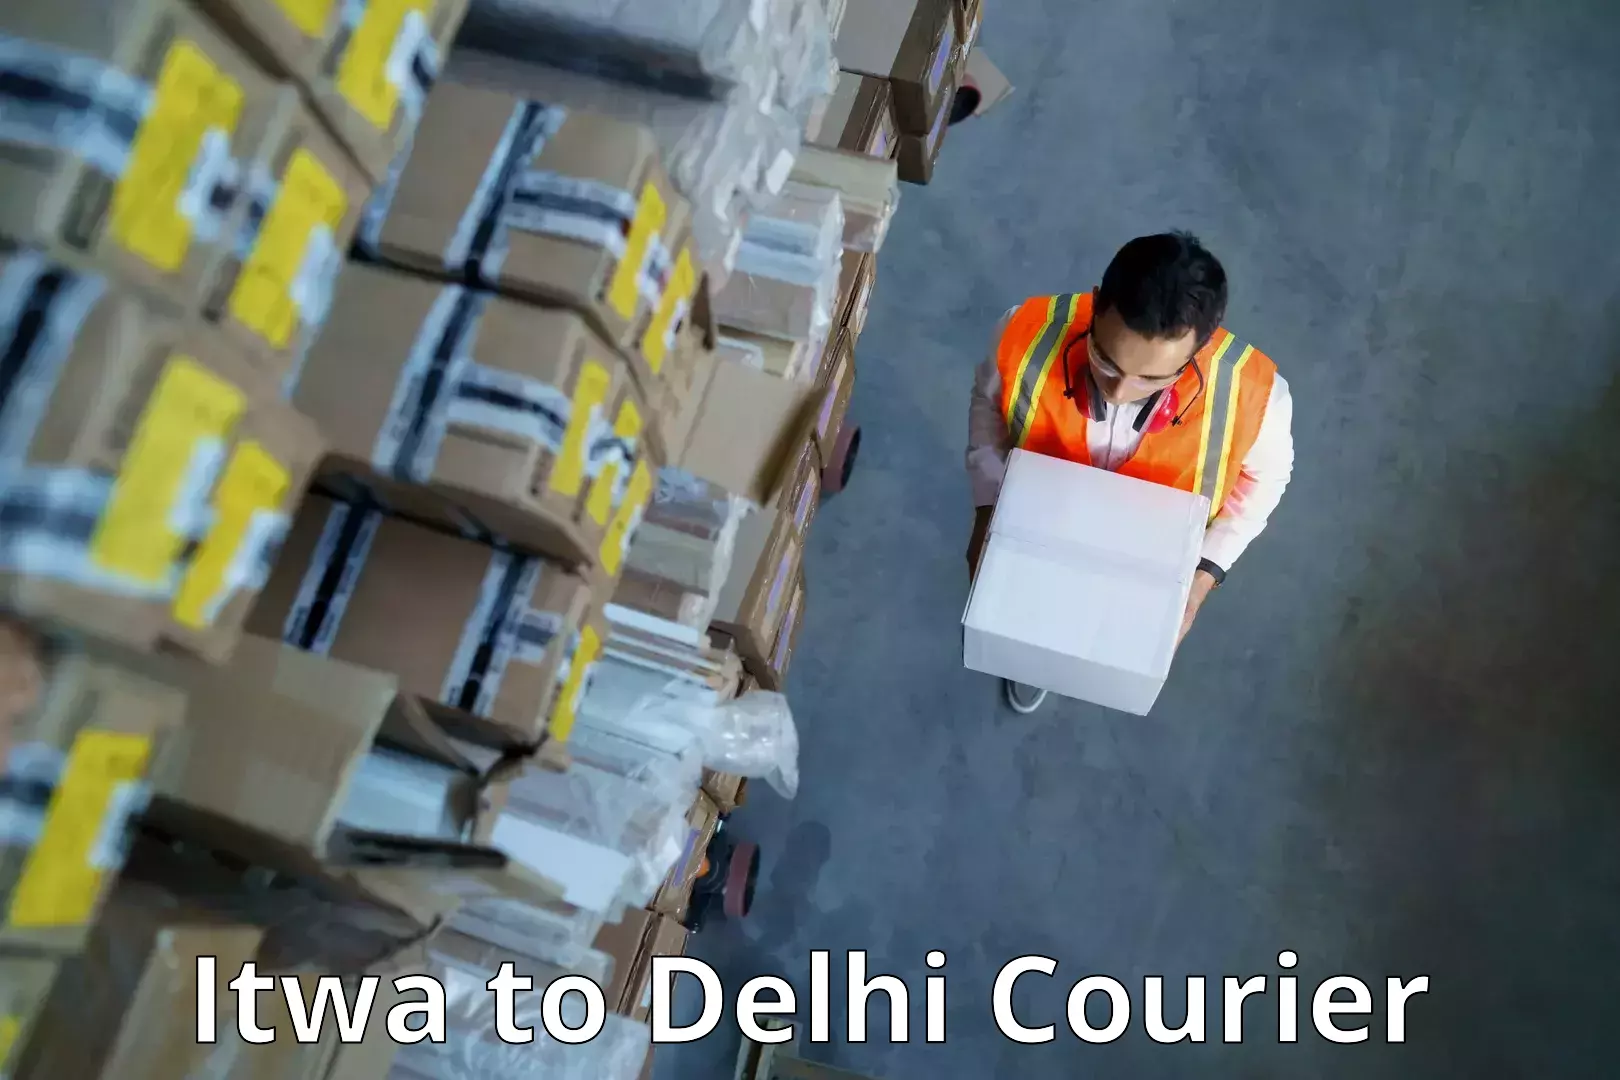 Tech-enabled shipping Itwa to Delhi